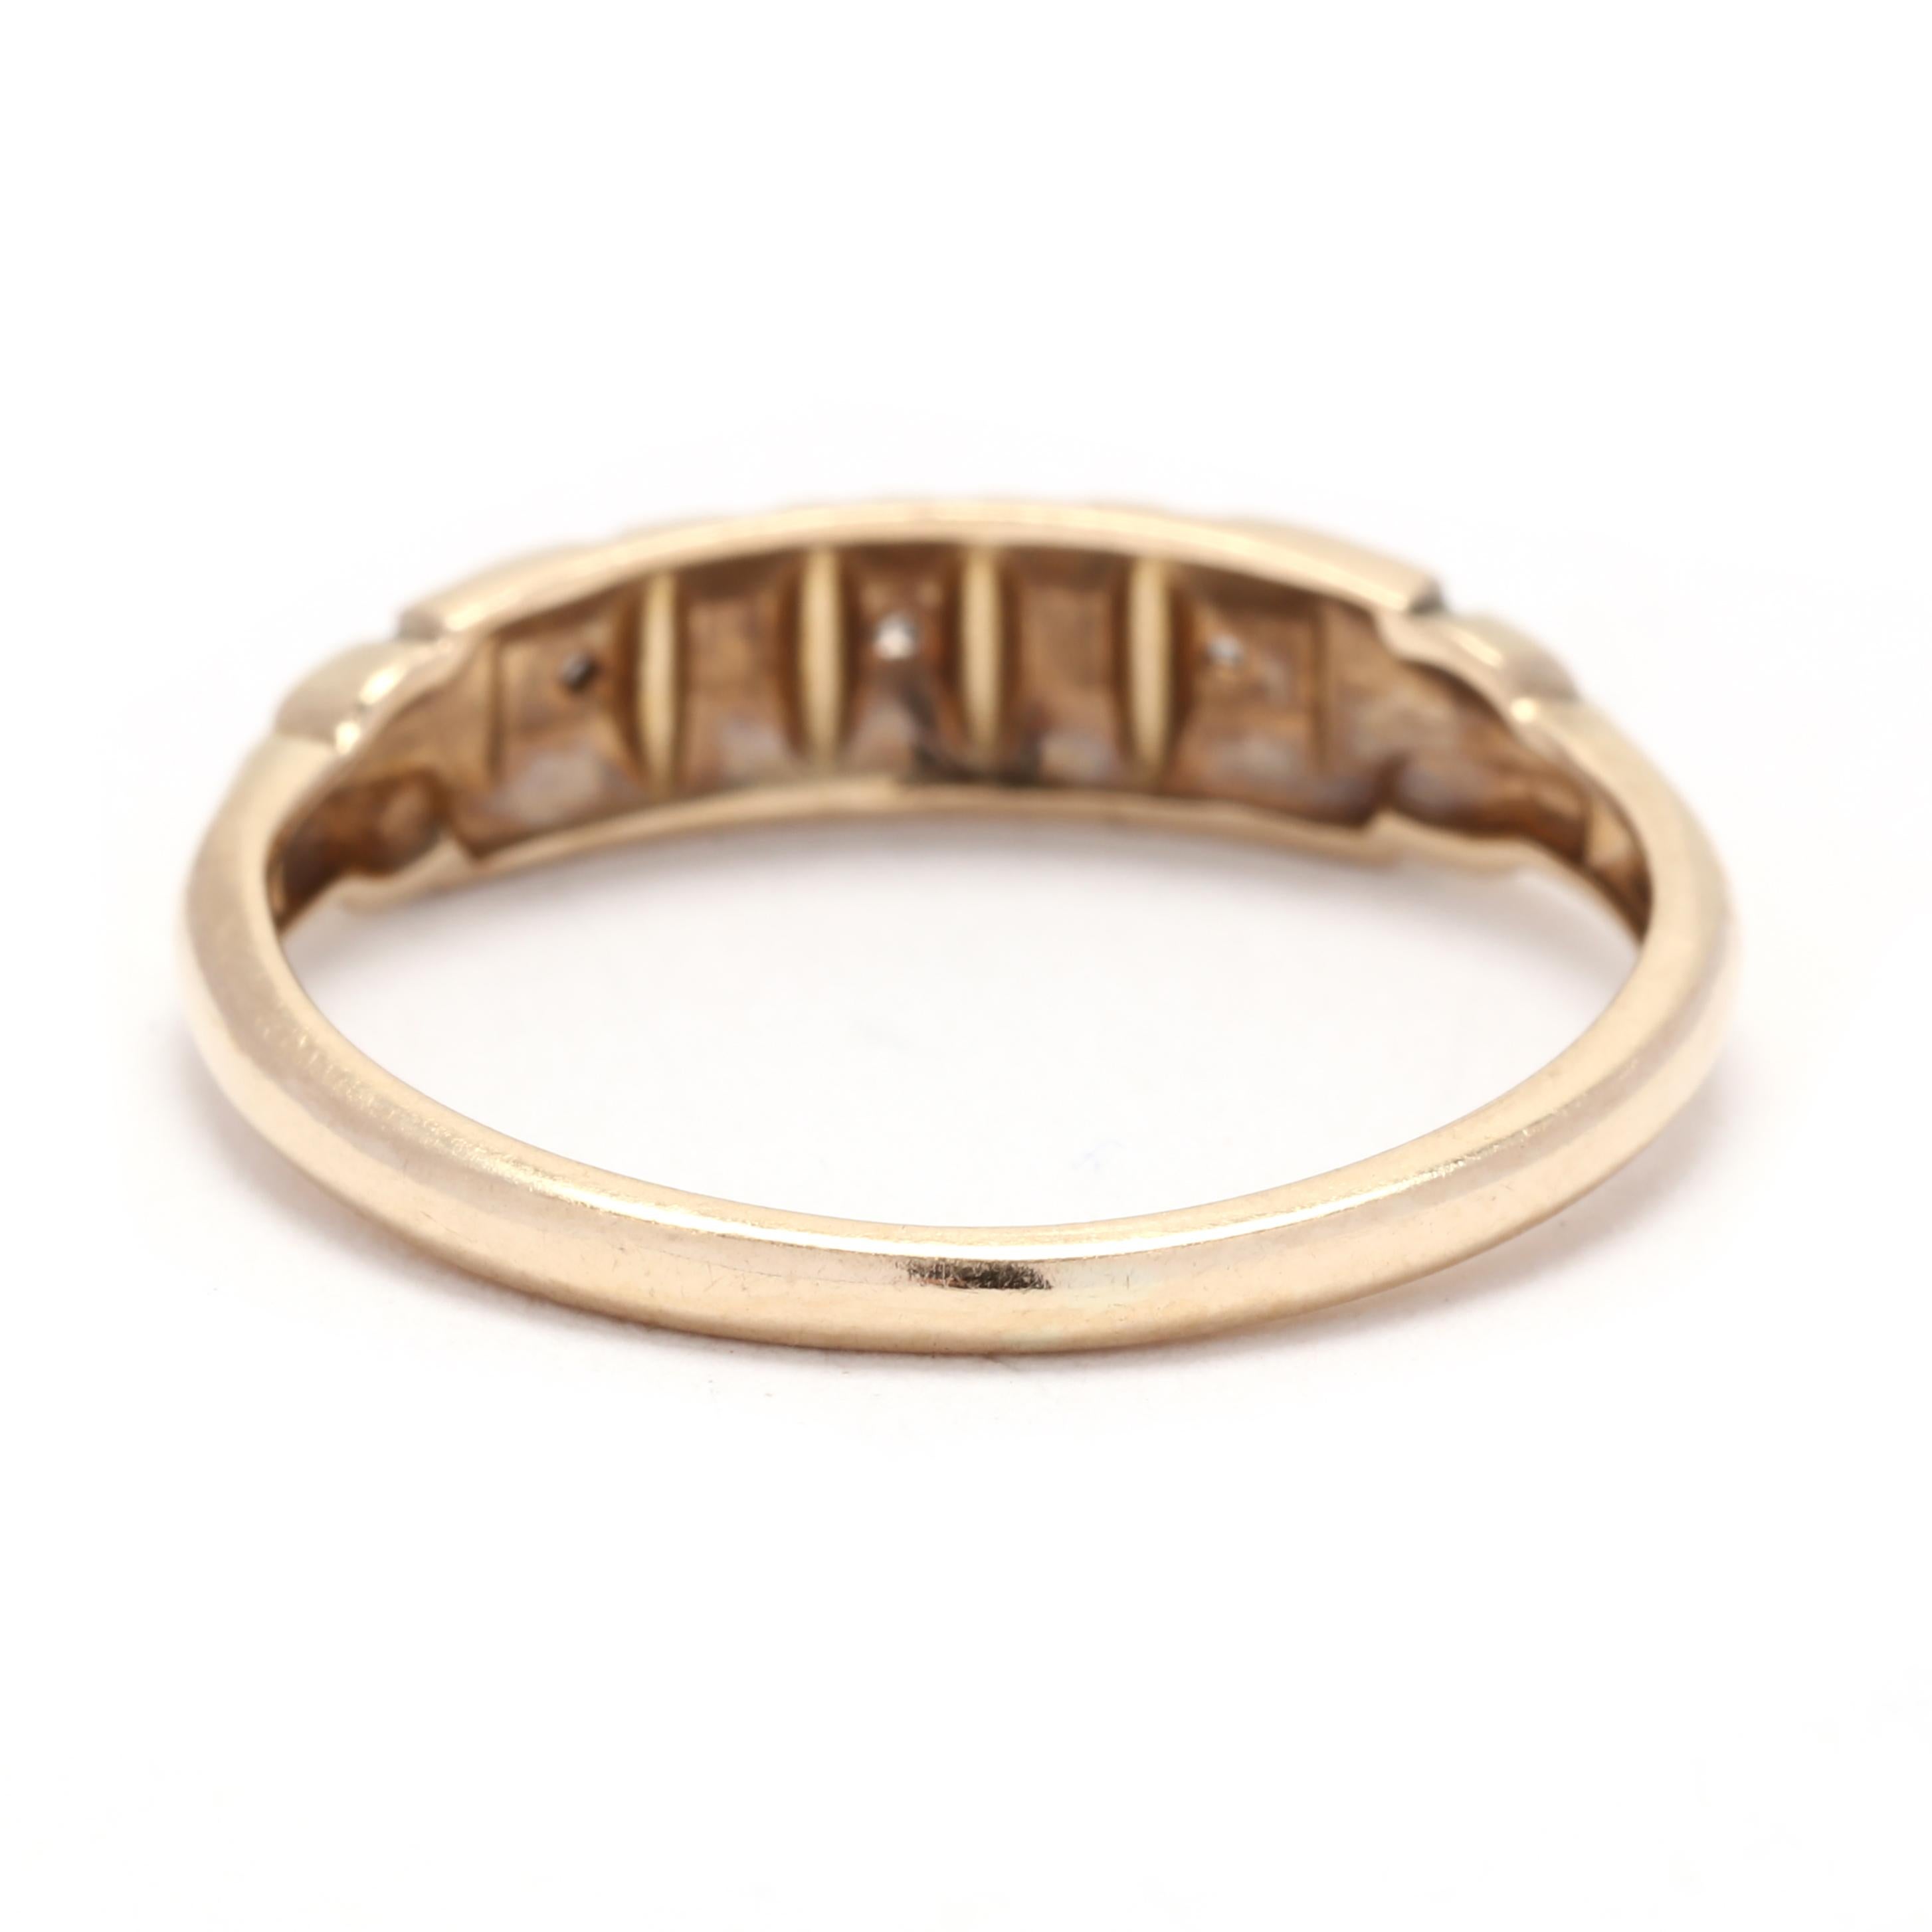 This Retro Diamond Wedding Band is a stunning and unique choice for your special day. Made with 14K yellow gold, this ring features a thin band with a total carat weight of 0.03. The diamonds are round cut and set in a retro-inspired